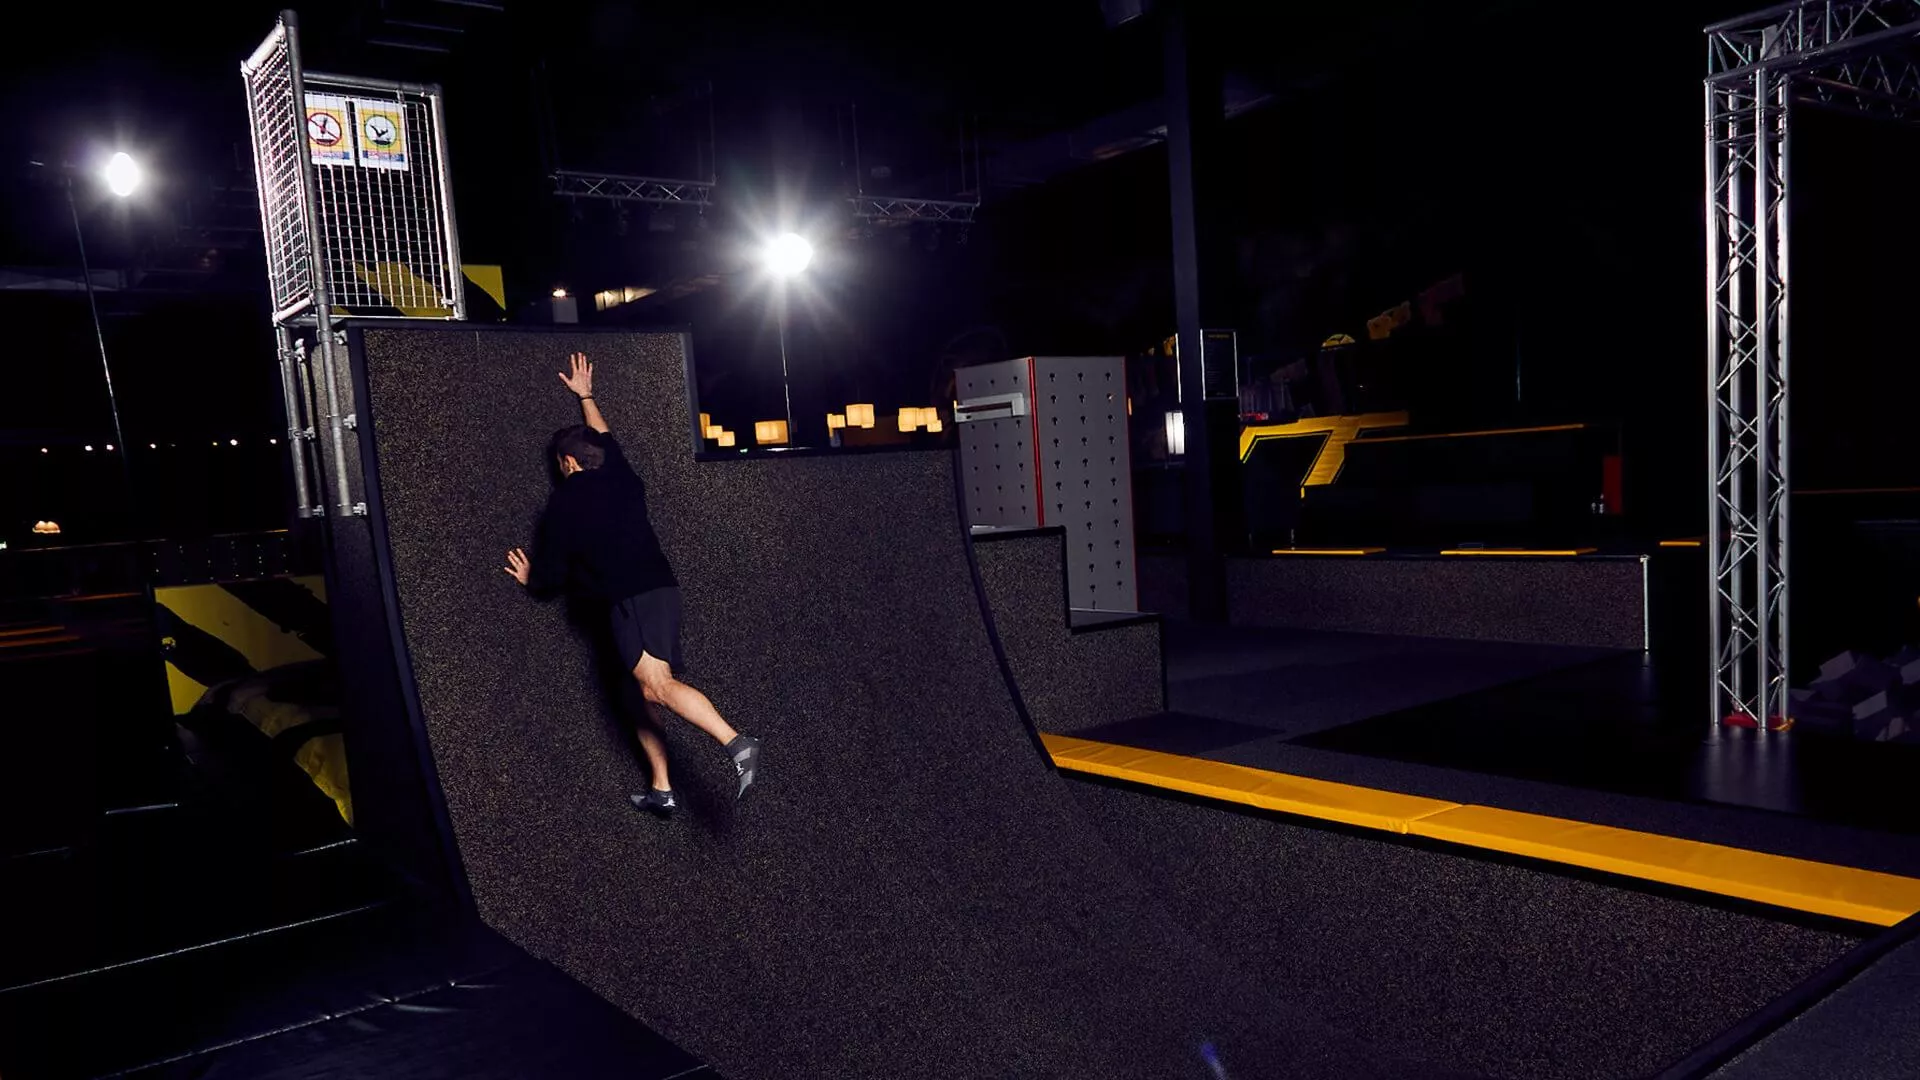  Kafle trampoline park attractions - Warped Wall